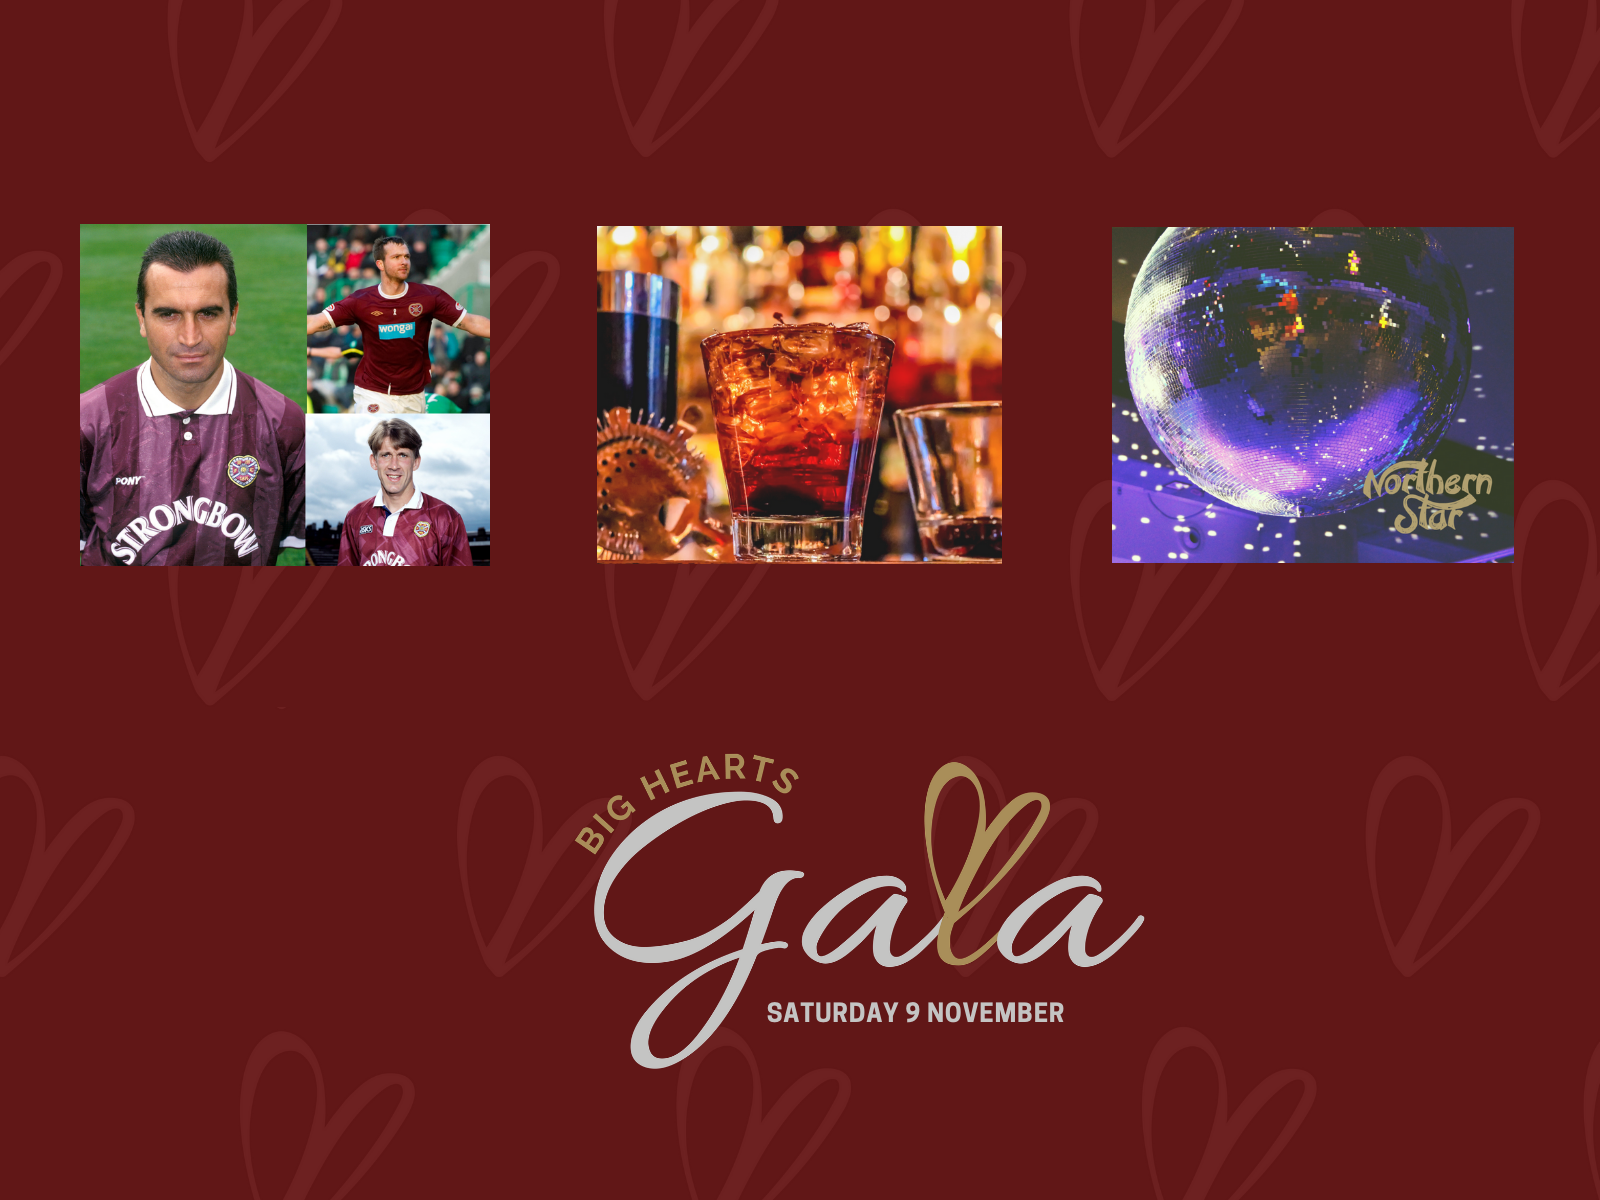  » Big Hearts Gala: Event details for Supporters